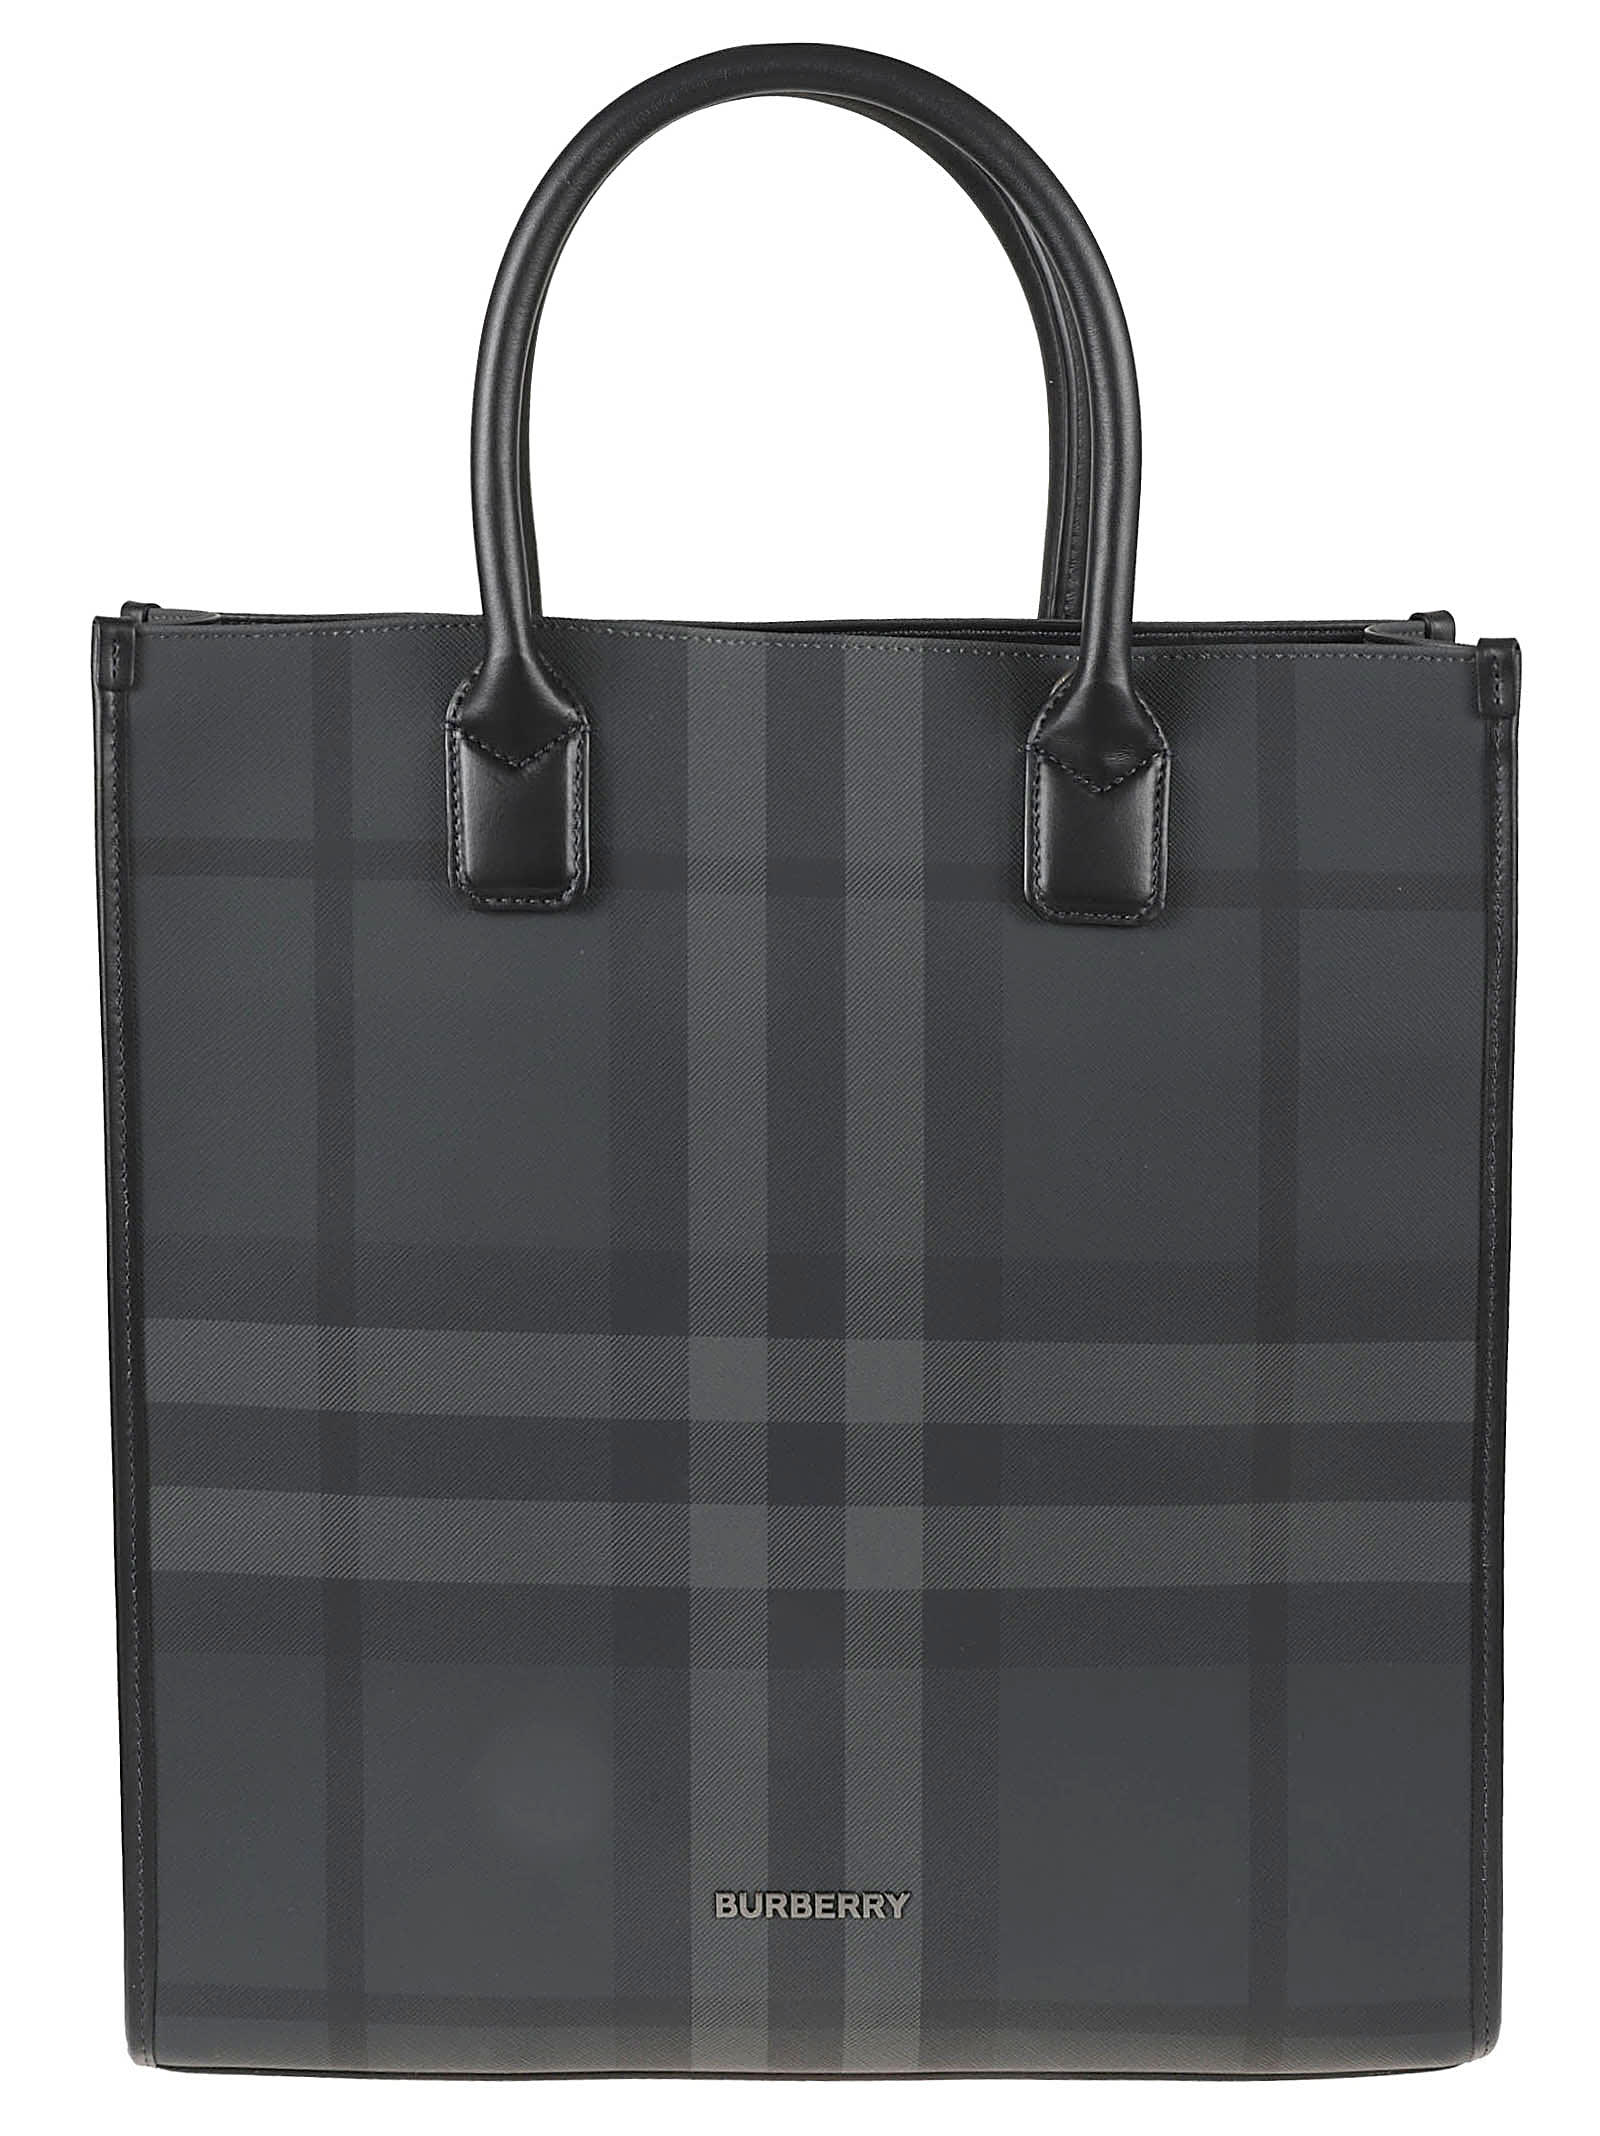 BURBERRY ROUND TOP HANDLE CHECKED TOTE